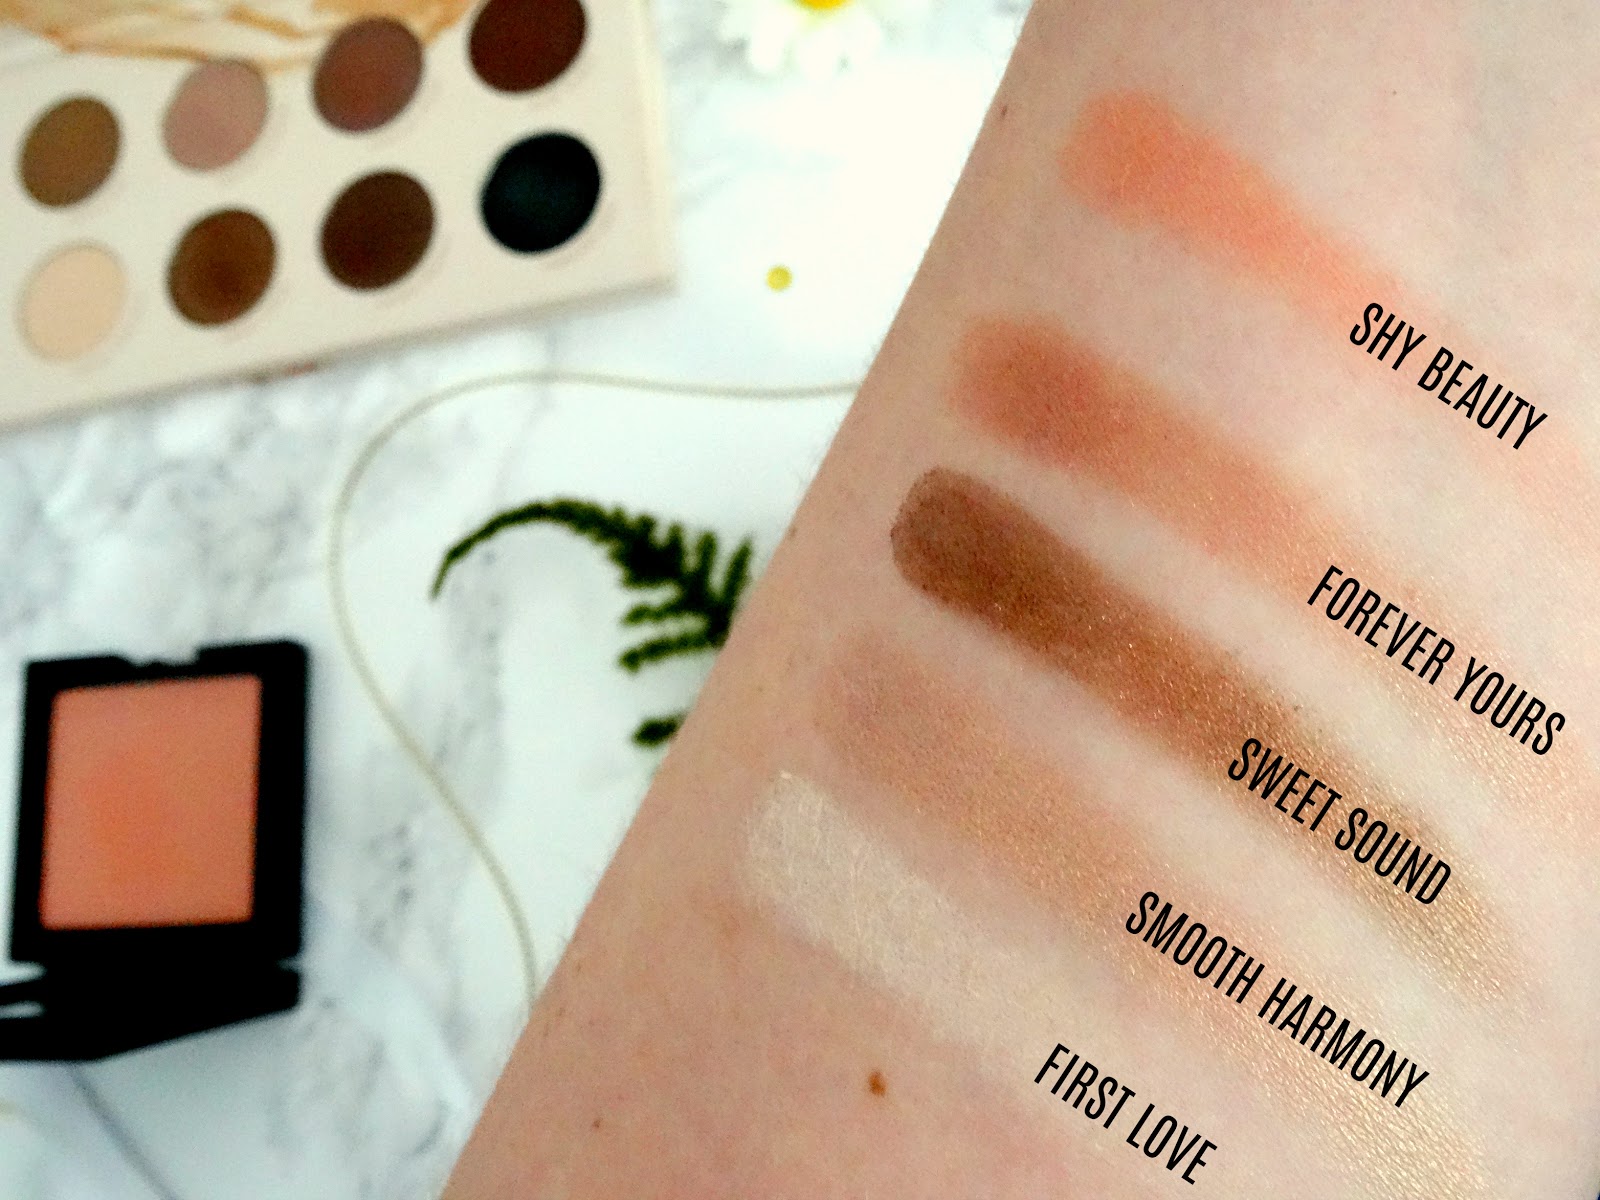 Zoeva Shy Girl Blush and Naturally Yours Palette Swatches